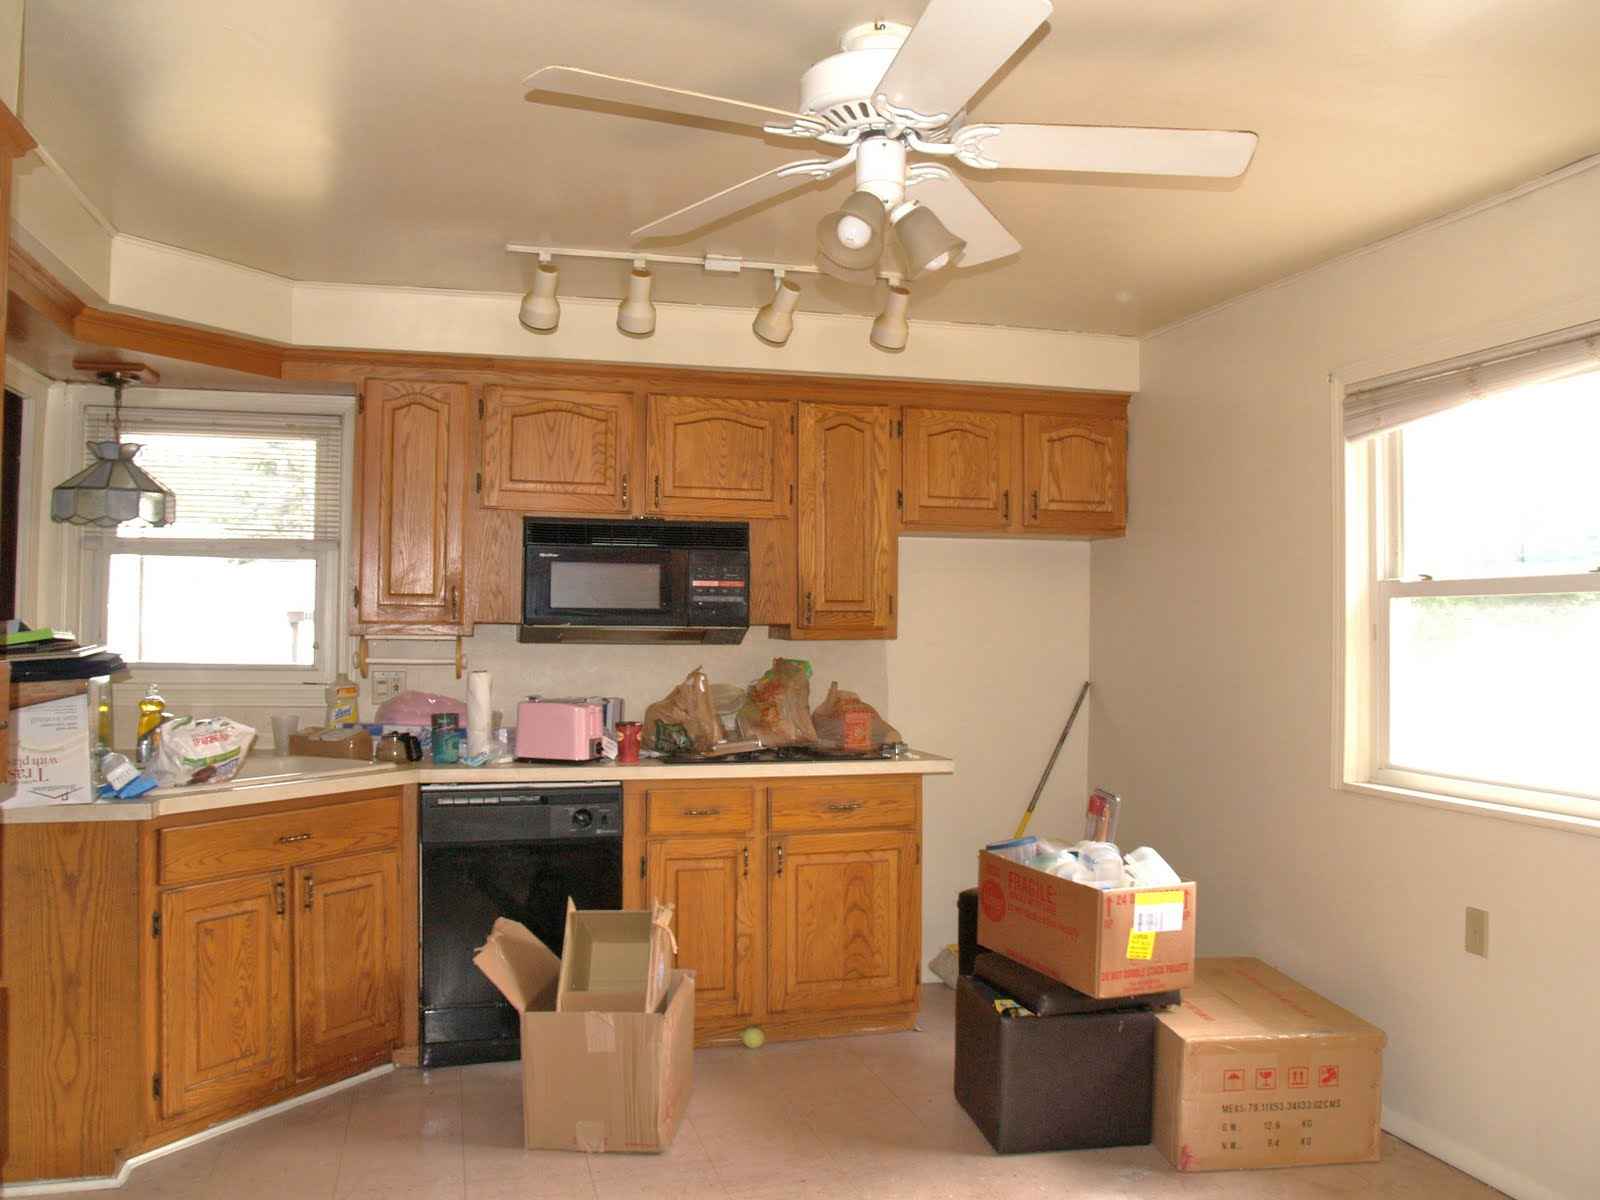 10 Tips To Help You Get the Right Ceiling fan for kitchen ...